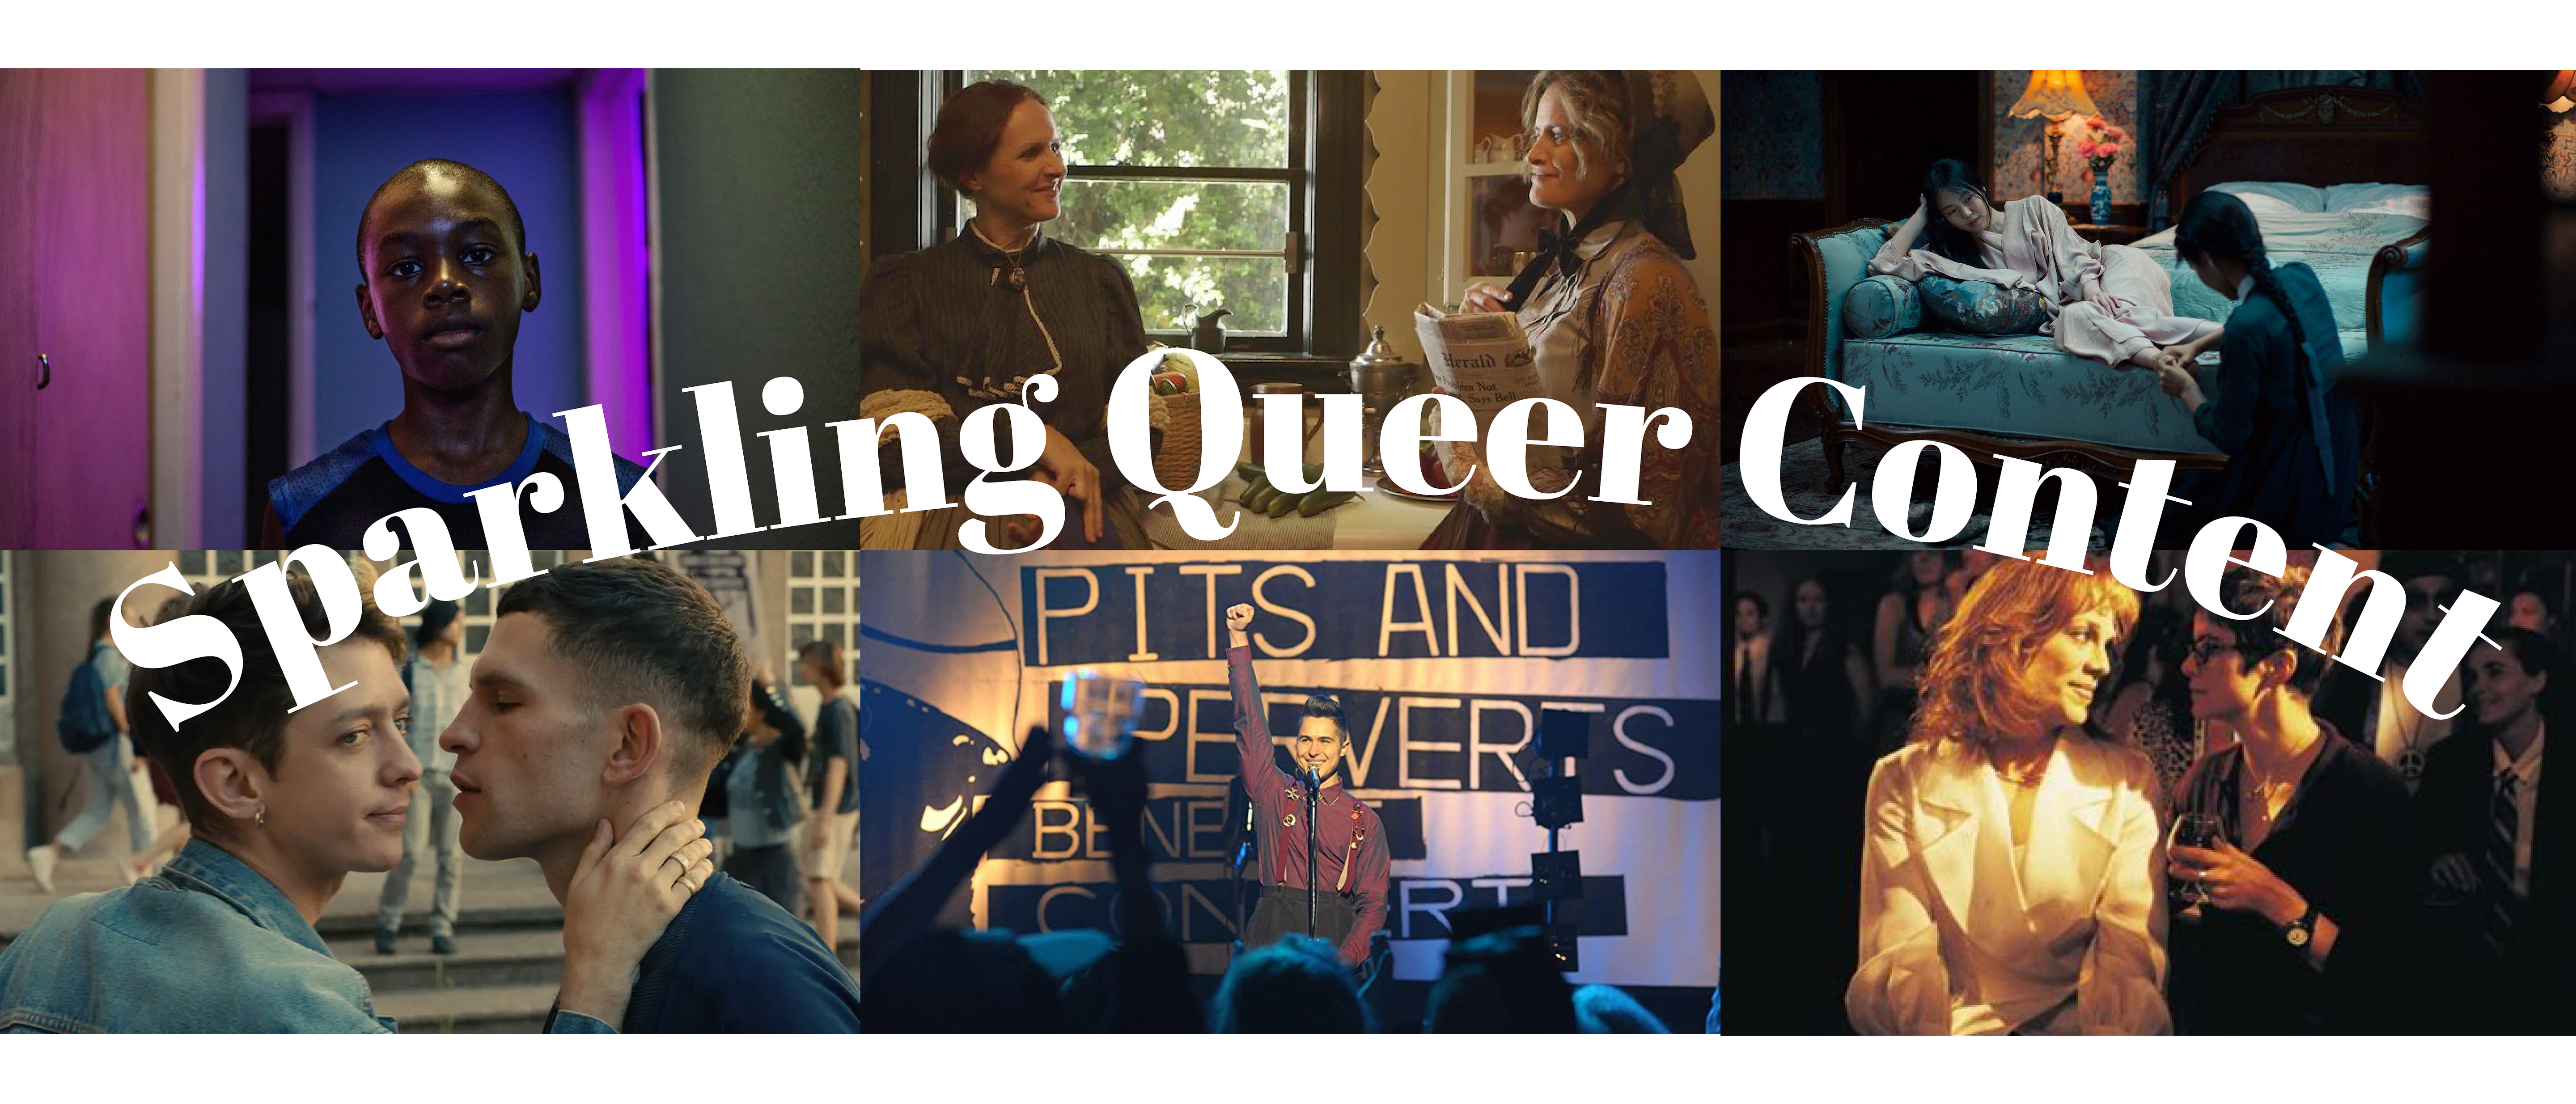 Header image with screen stills from various queer films, including Moonlight, Wild Nights With Emily, The Handmaiden, 160 BPM, Pride and Better Than Chocolate. Curved white text over the image layout reads: Sparkling Queer Content